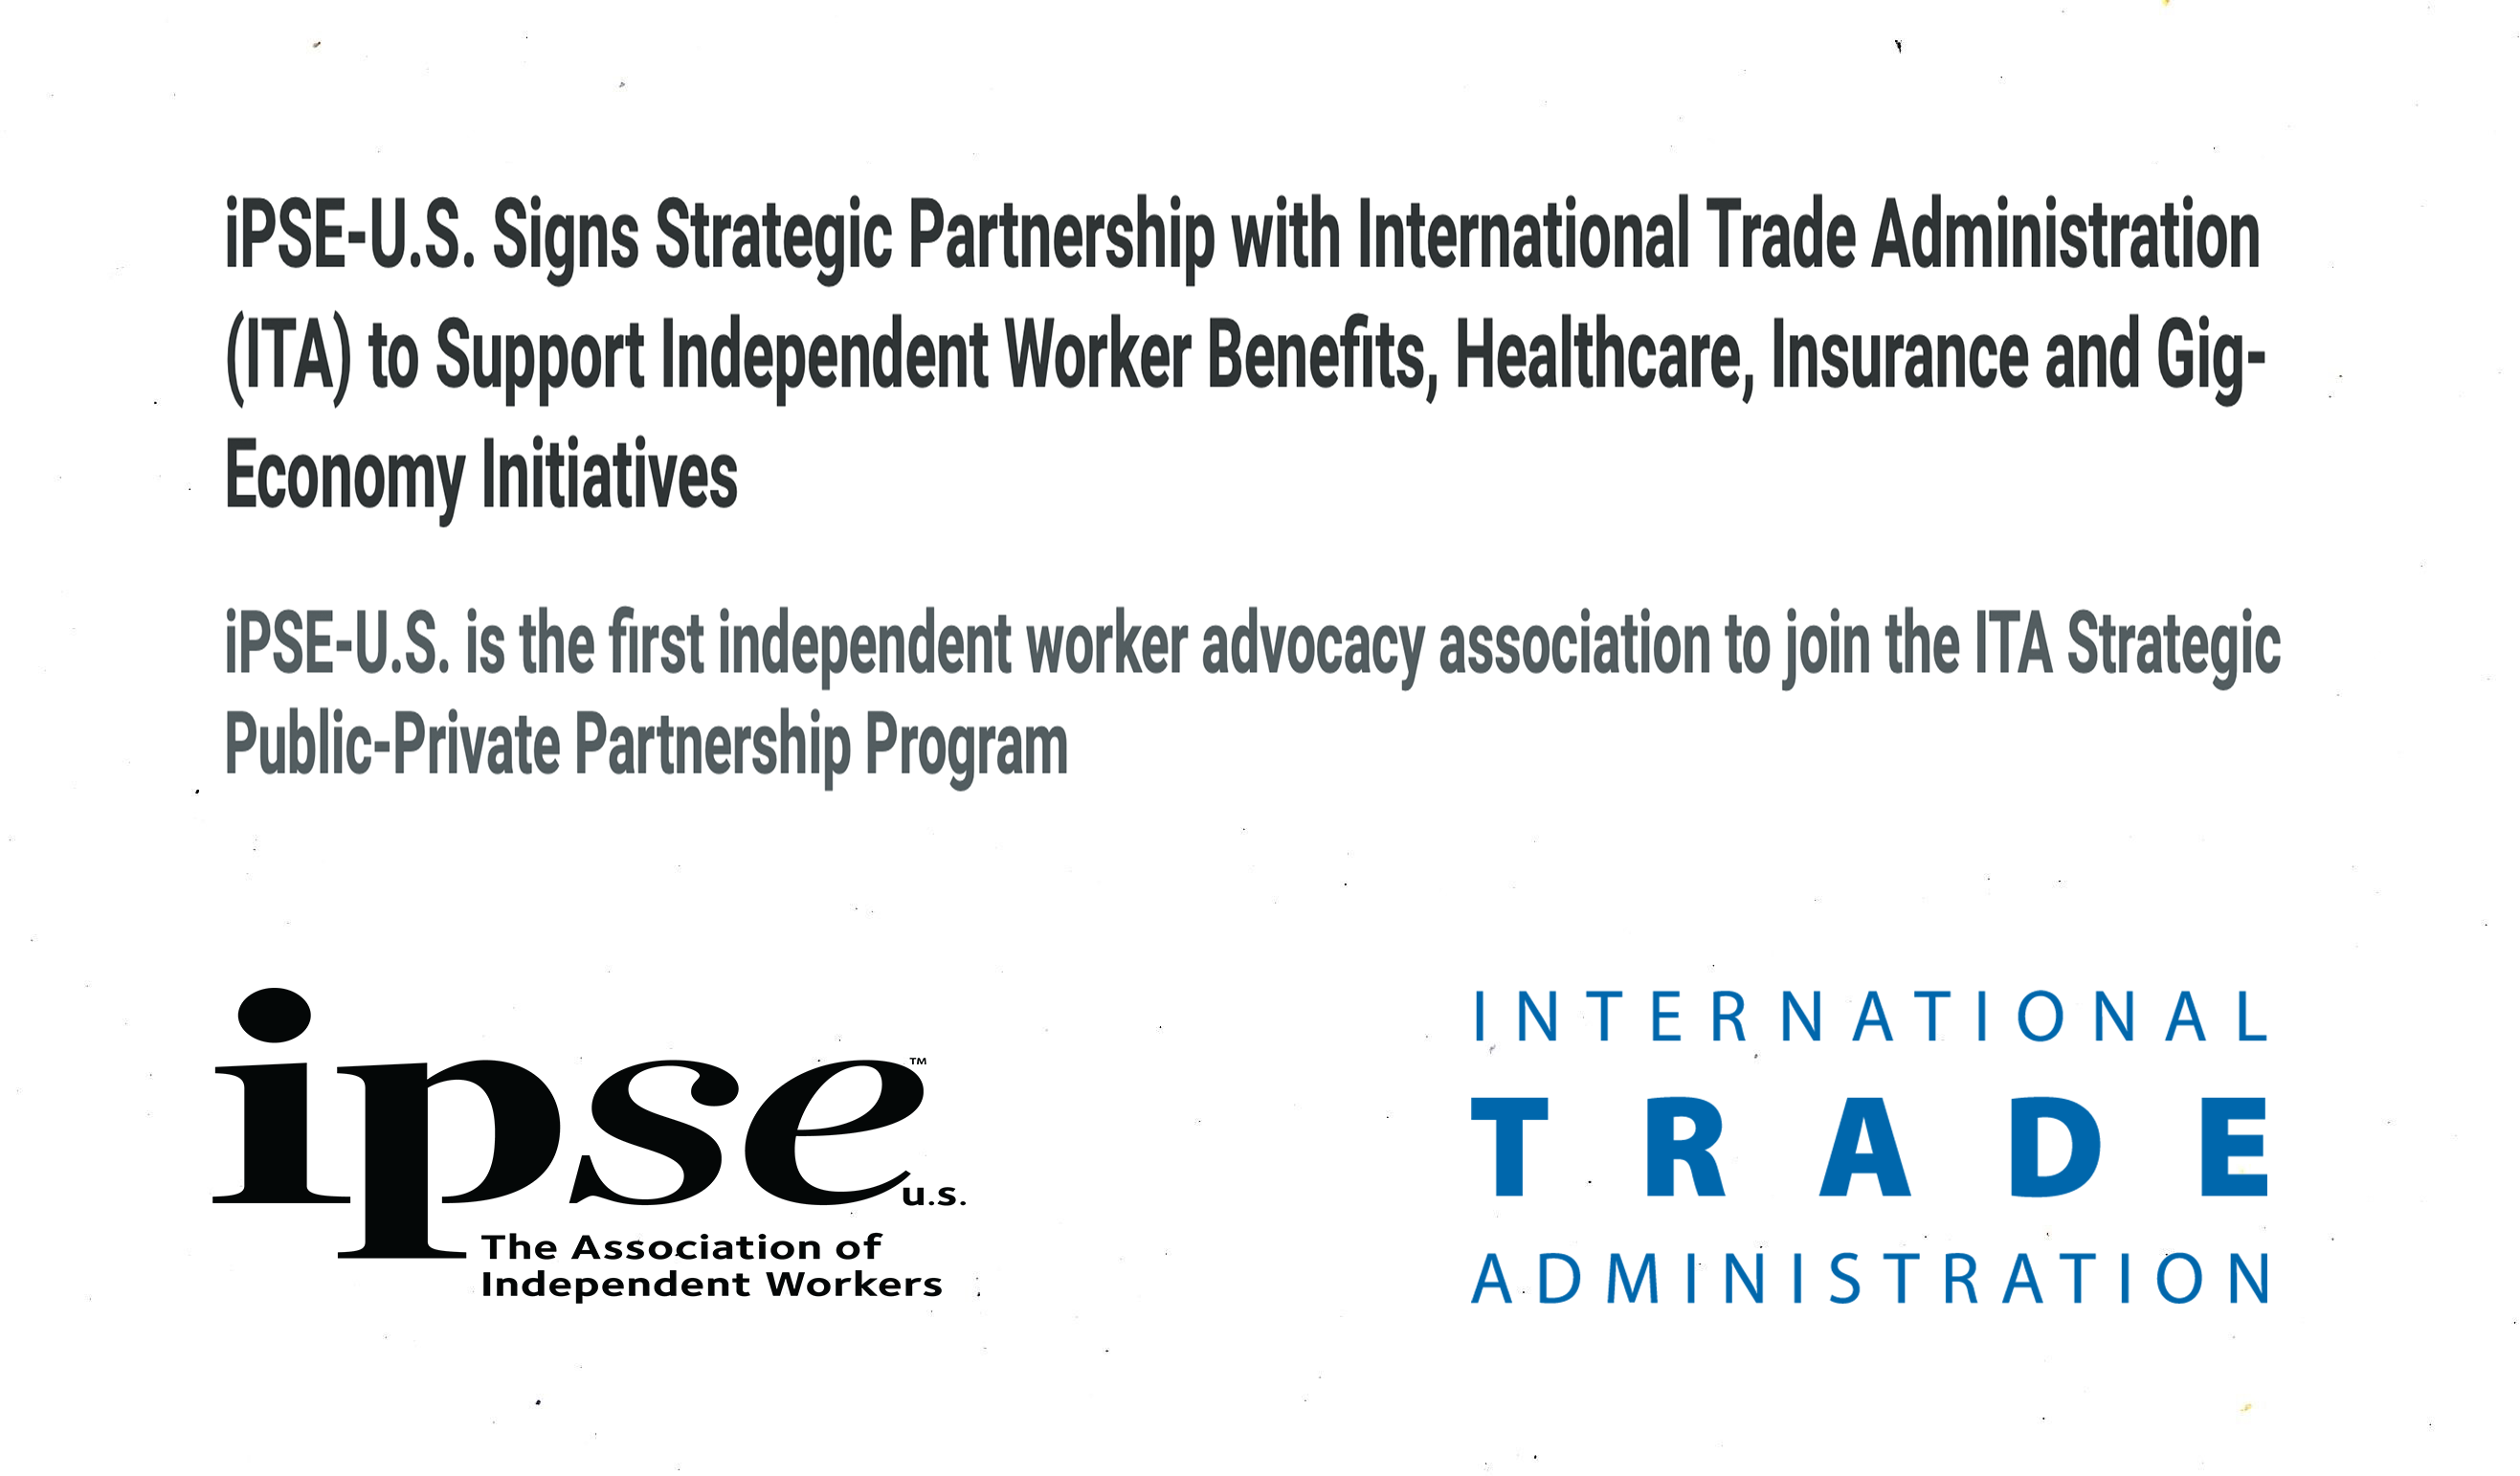 iPSE-U.S. Signs Strategic Partnership with International Trade Administration (ITA) to Support Independent Worker Benefits, Healthcare, Insurance and Gig-Economy Initiatives